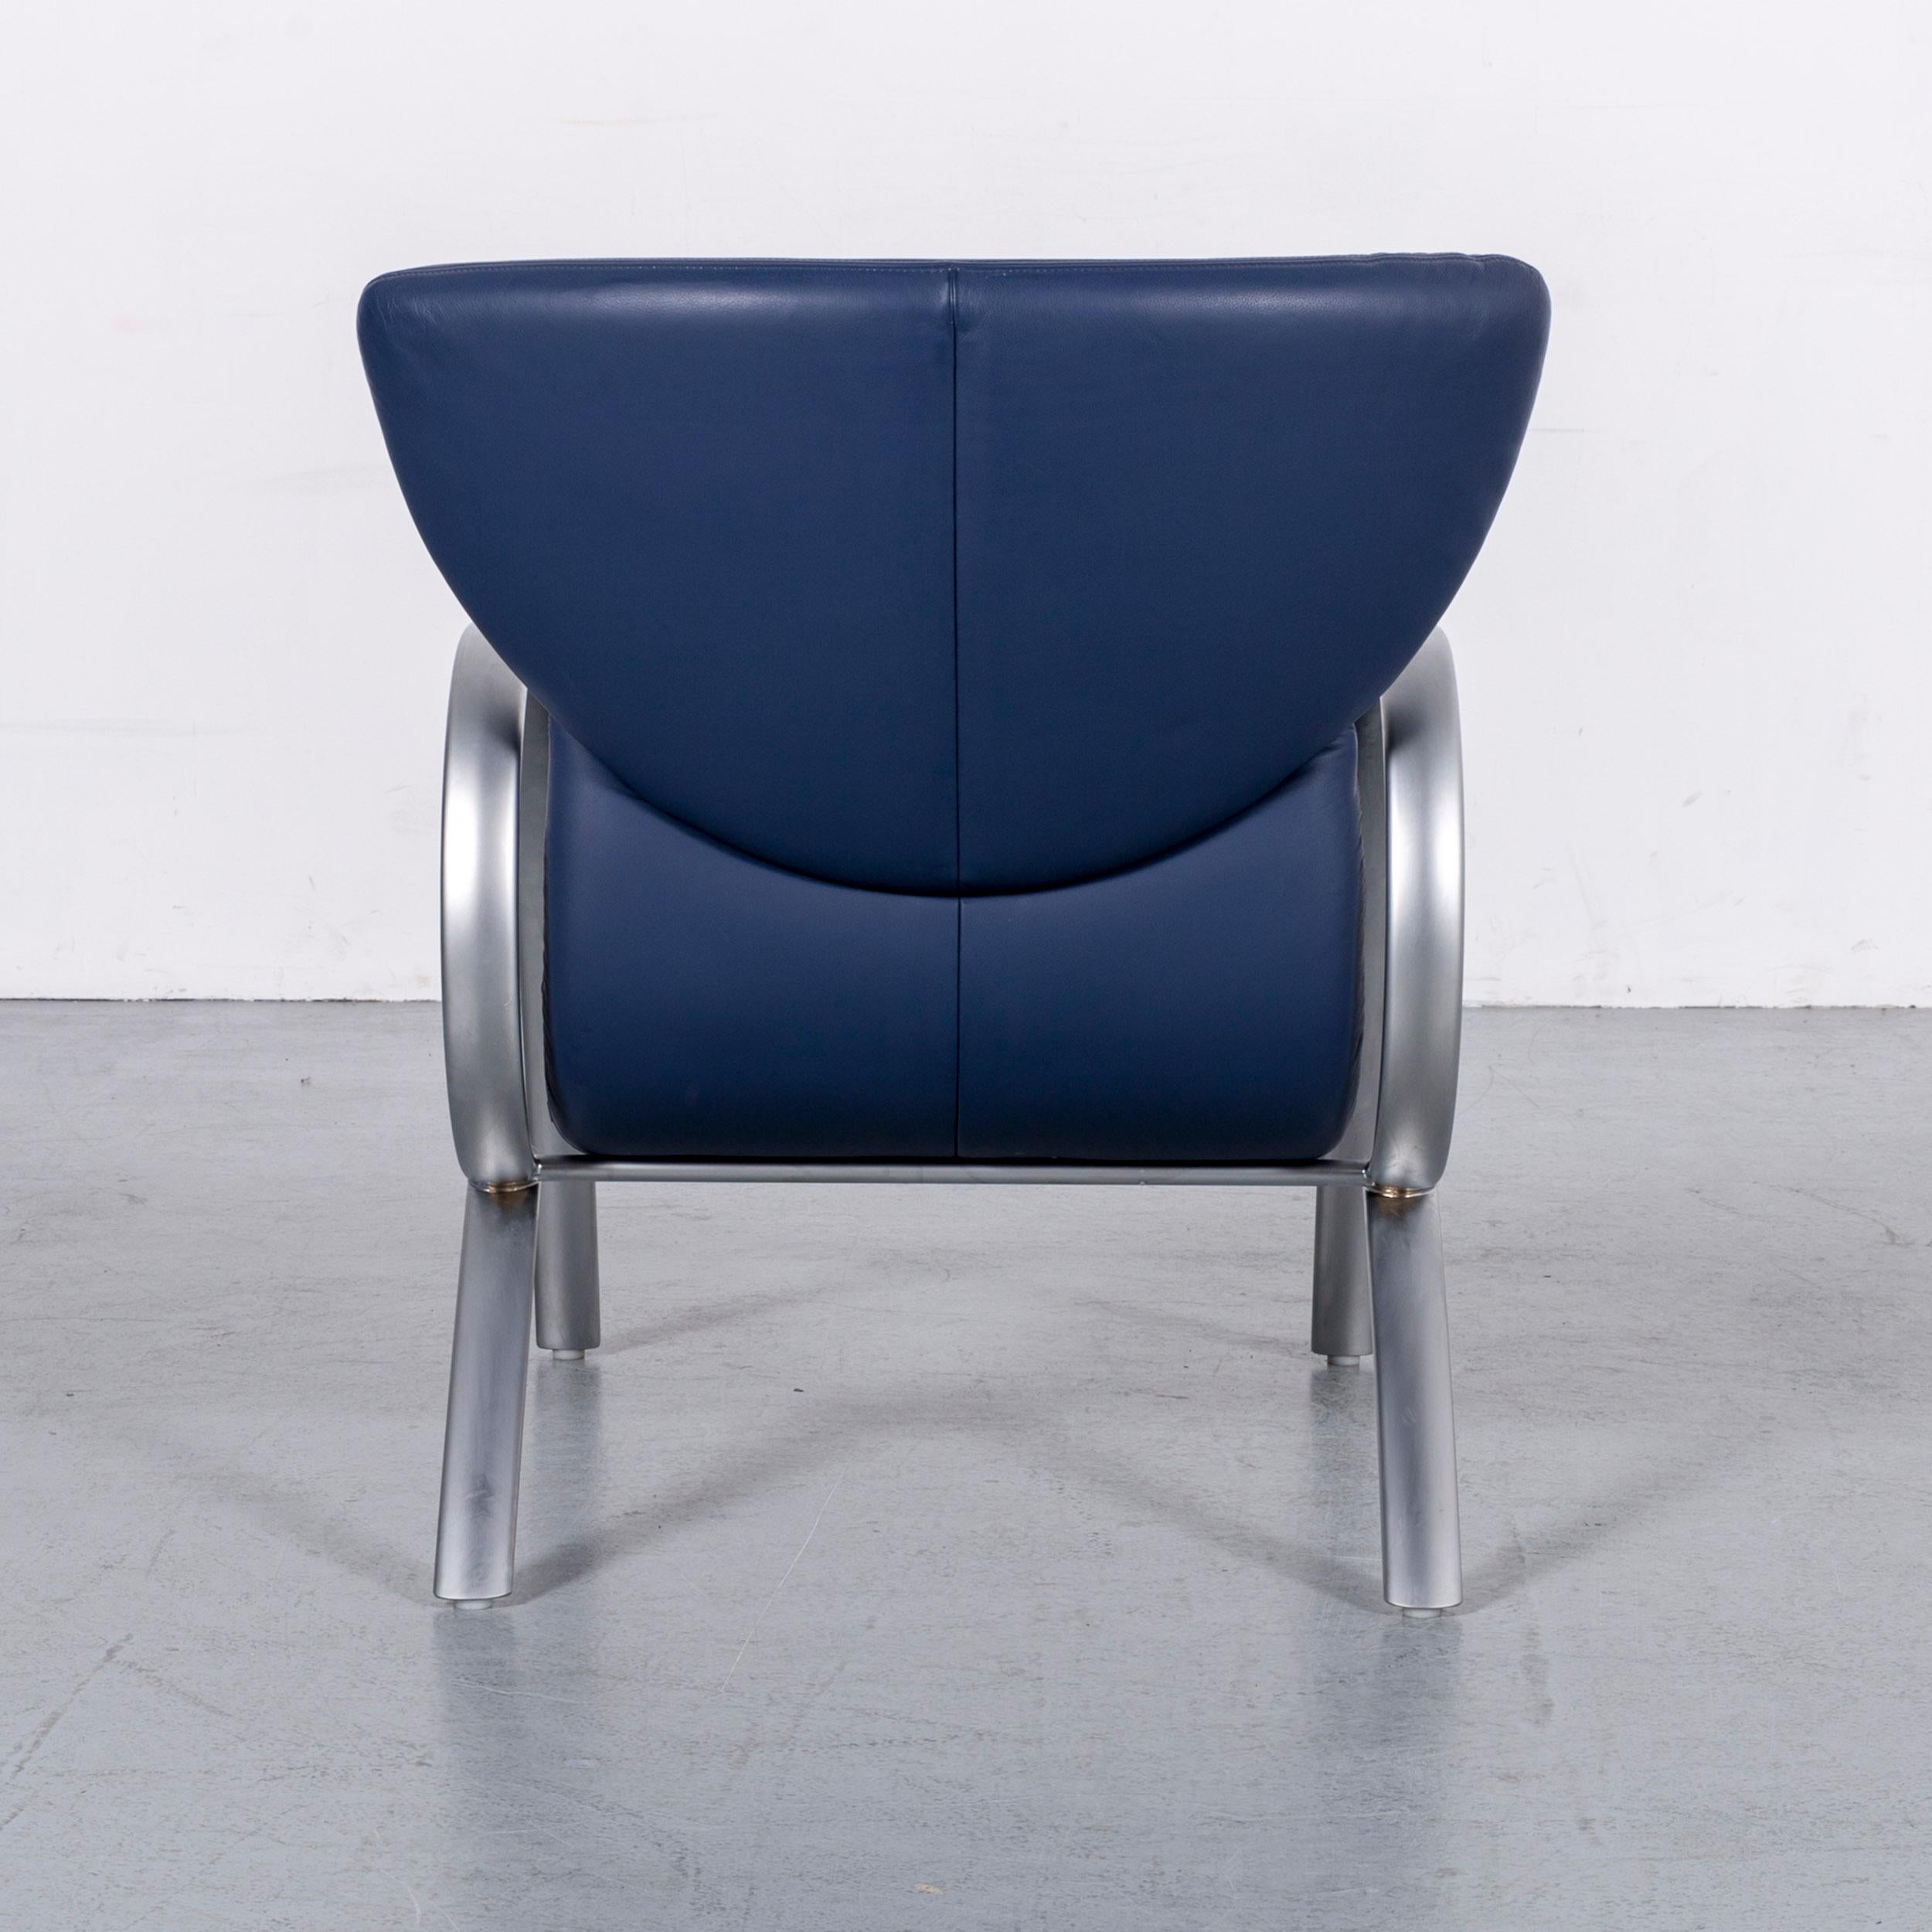 Rolf Benz 515 Designer Leather Armchair Blue One-Seat 2